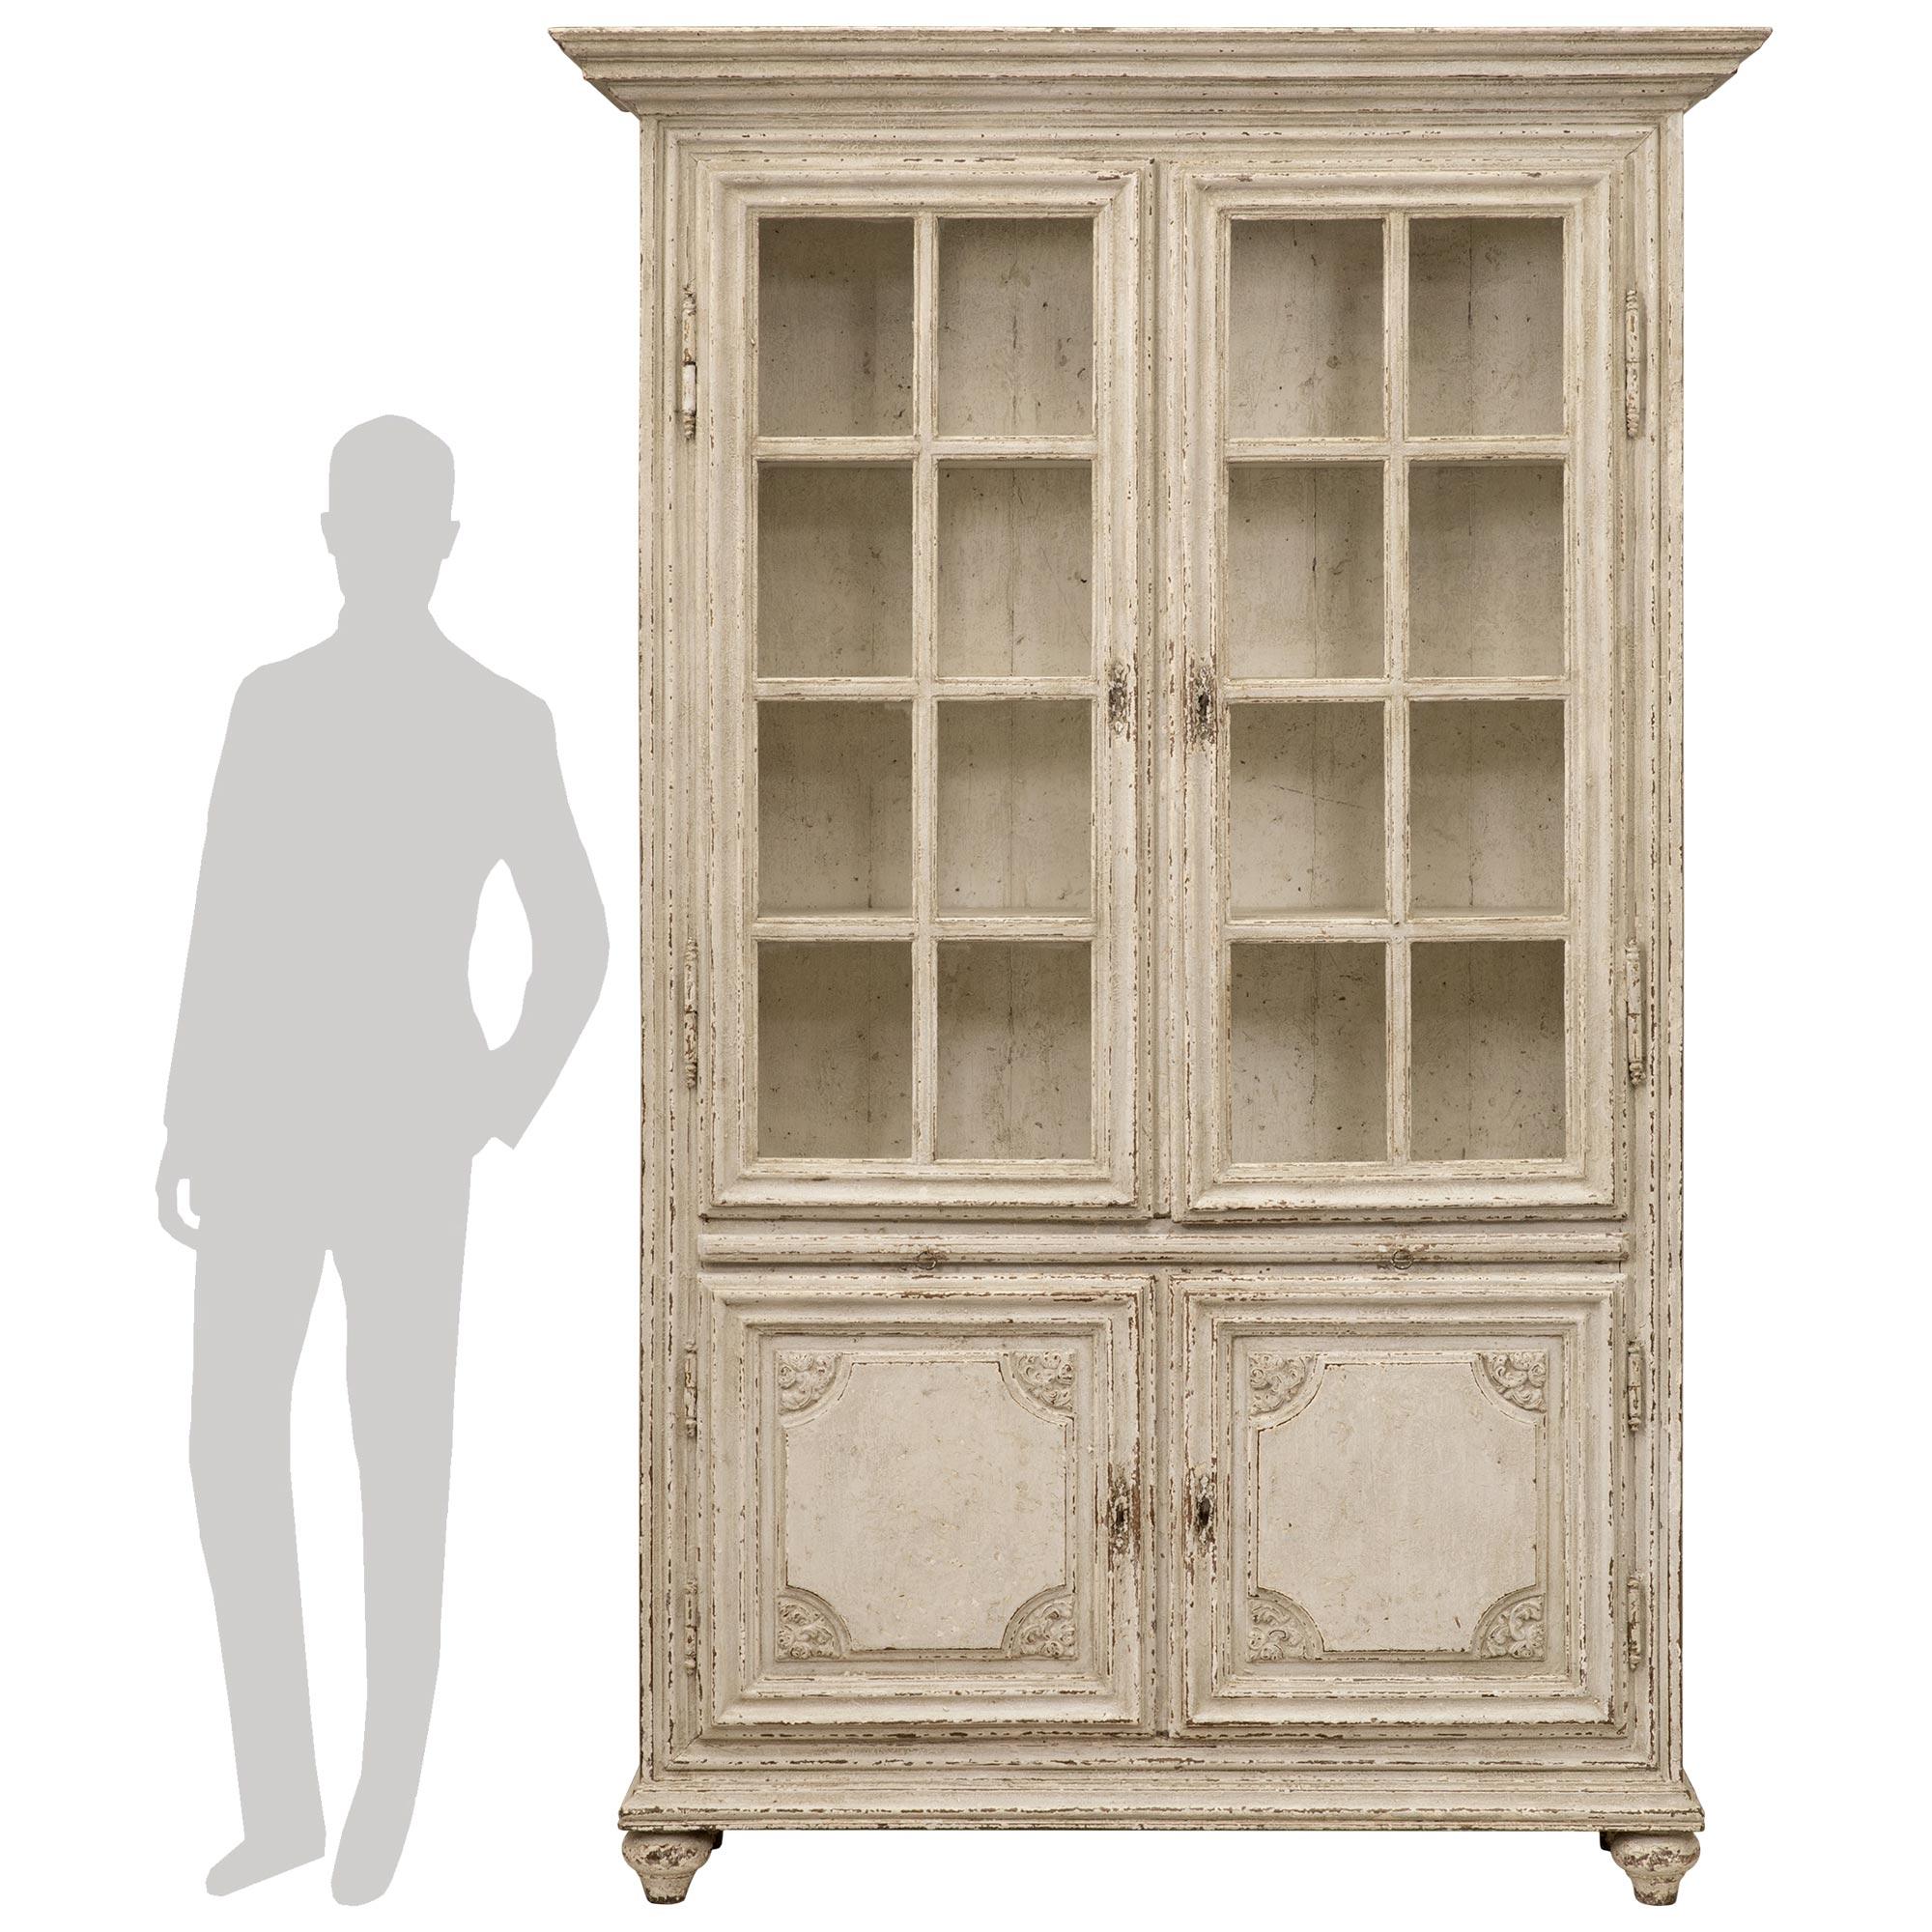 A beautiful and most decorative French 19th century Louis XVI st. patinated wood vitrine cabinet. The four door vitrine is raised by elegant topie shaped feet below the straight mottled border. The two bottom doors display a most decorative recessed